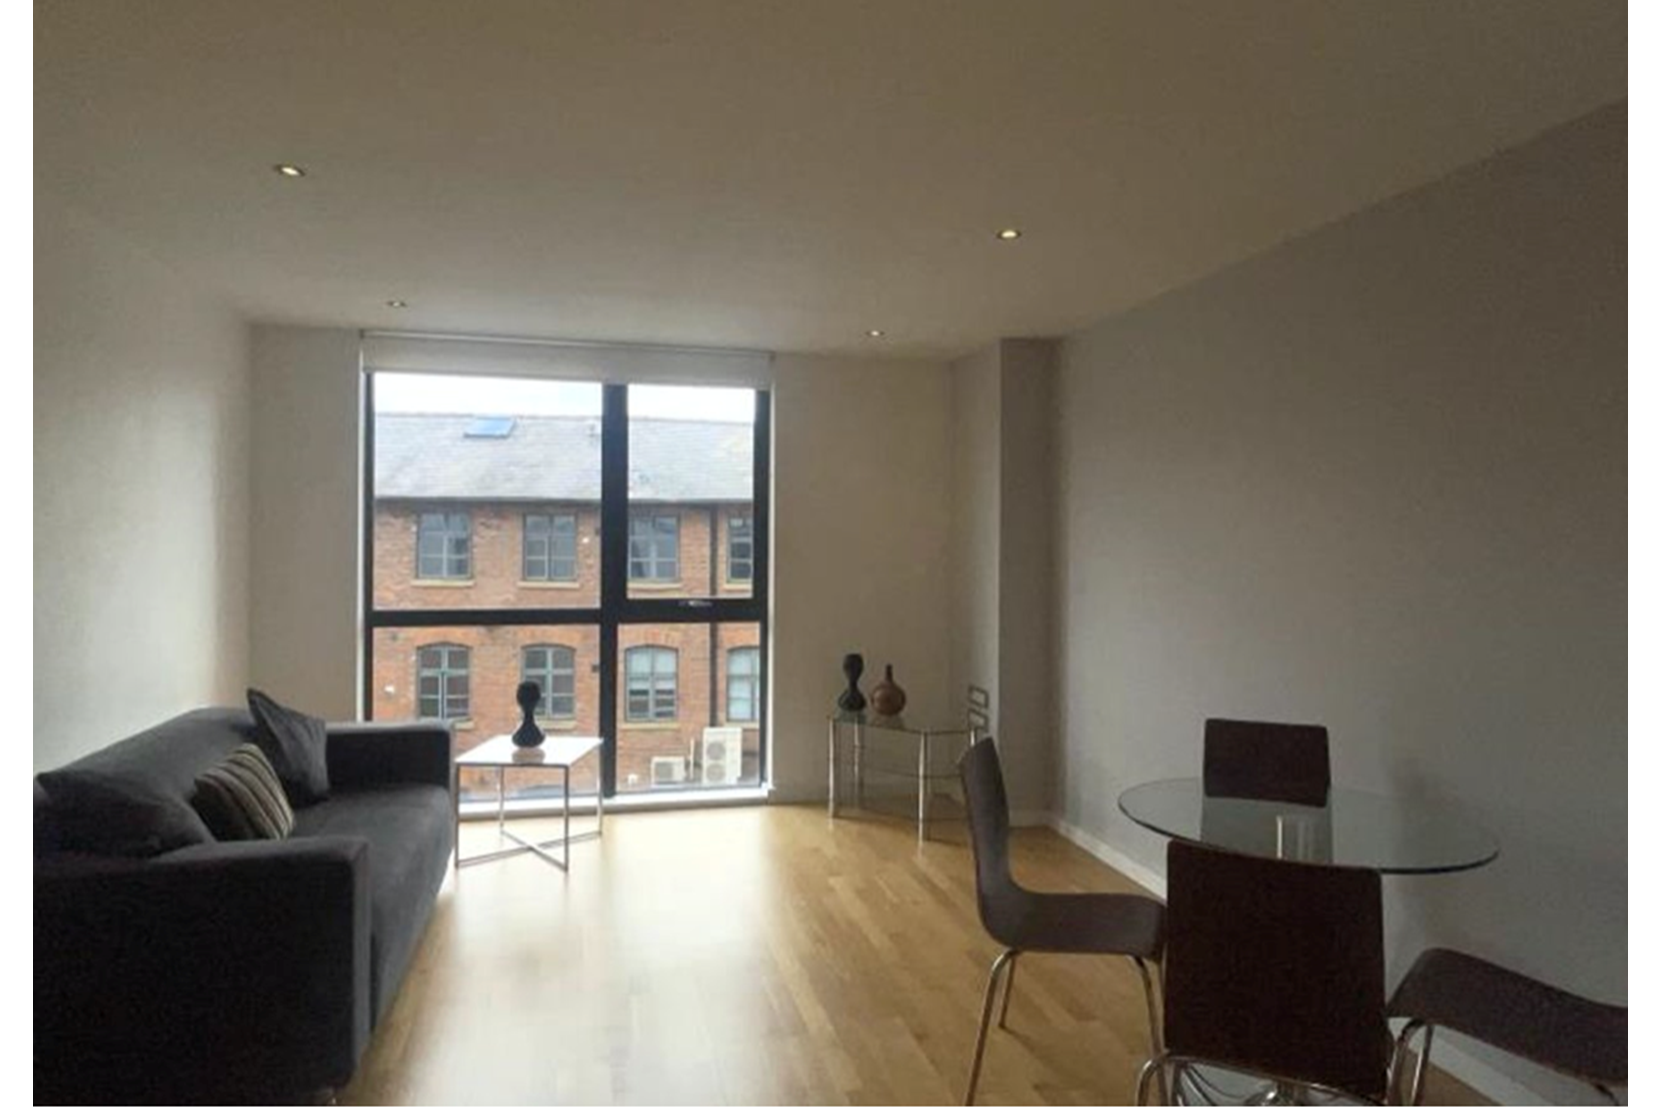 Apartments to Rent by Northern Group at Flint Glass Wharf, Manchester, M4, living dining area